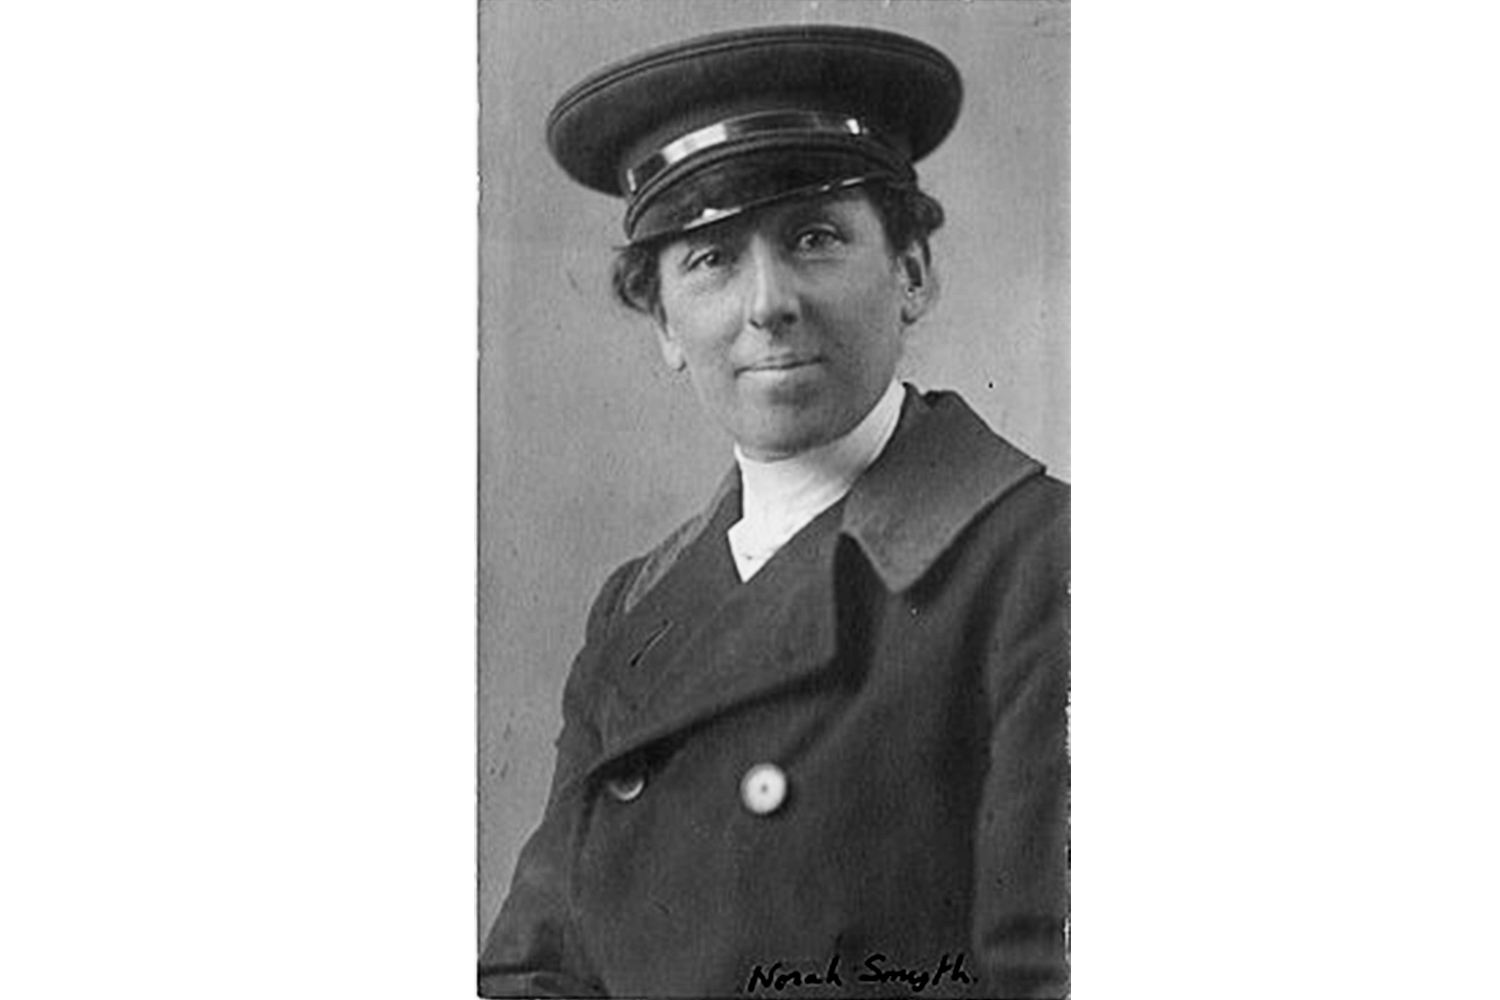 Photograph of Norah Smyth, Bow suffragette, photographer and chauffeur to Sylvia Pankhurst